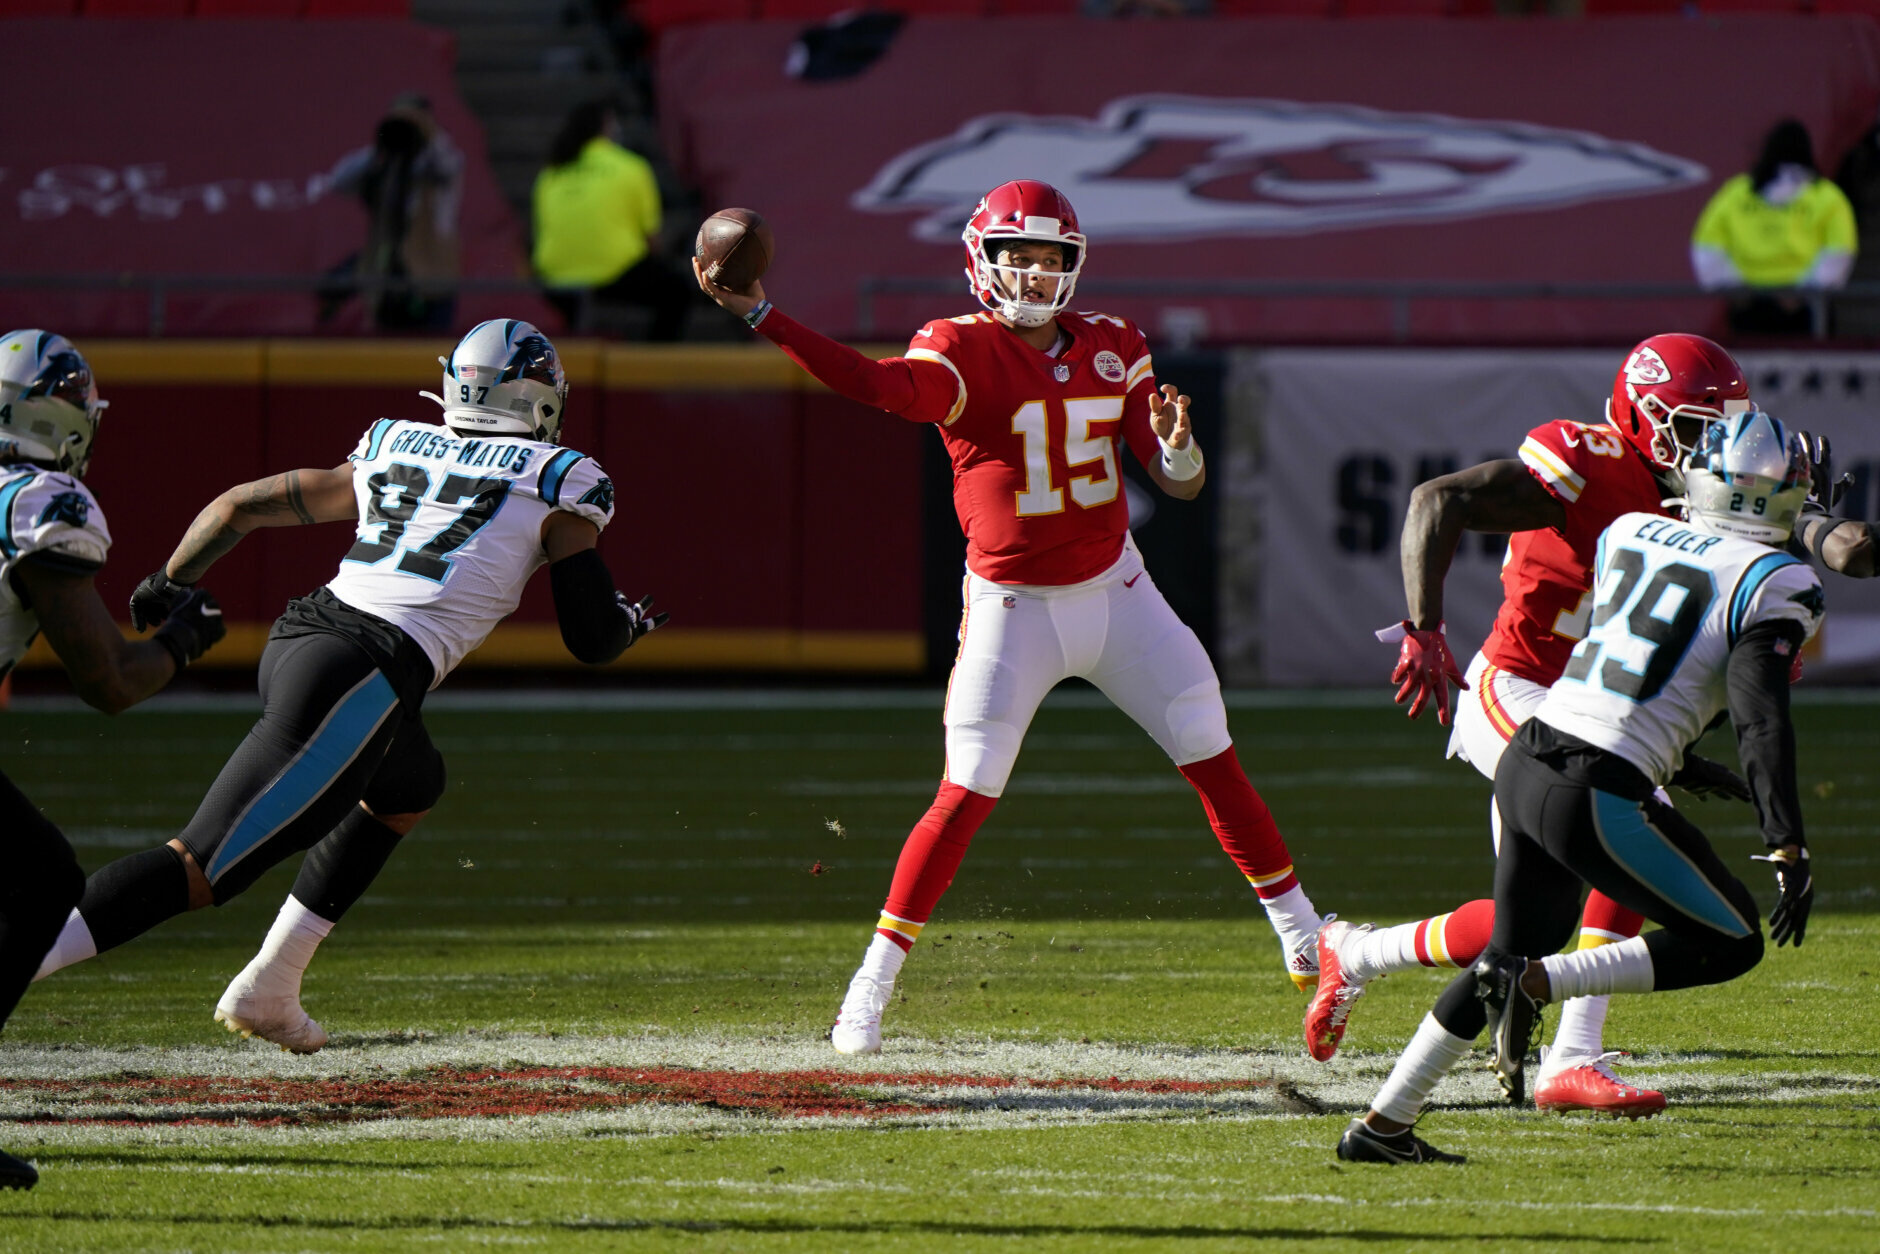 <p><b><i>Panthers 31</i></b><br />
<b><i>Chiefs 33</i></b></p>
<p>Patrick Mahomes is the fastest to 100 touchdown passes (40 games) in NFL history, and if he continues <a href="https://twitter.com/ESPNStatsInfo/status/1325566266191405056?s=20">this tear</a> and Russell Wilson shoots a couple more blanks trying to overcompensate for Seattle&#8217;s defense, Mahomes will grab his second MVP. Book it.</p>
